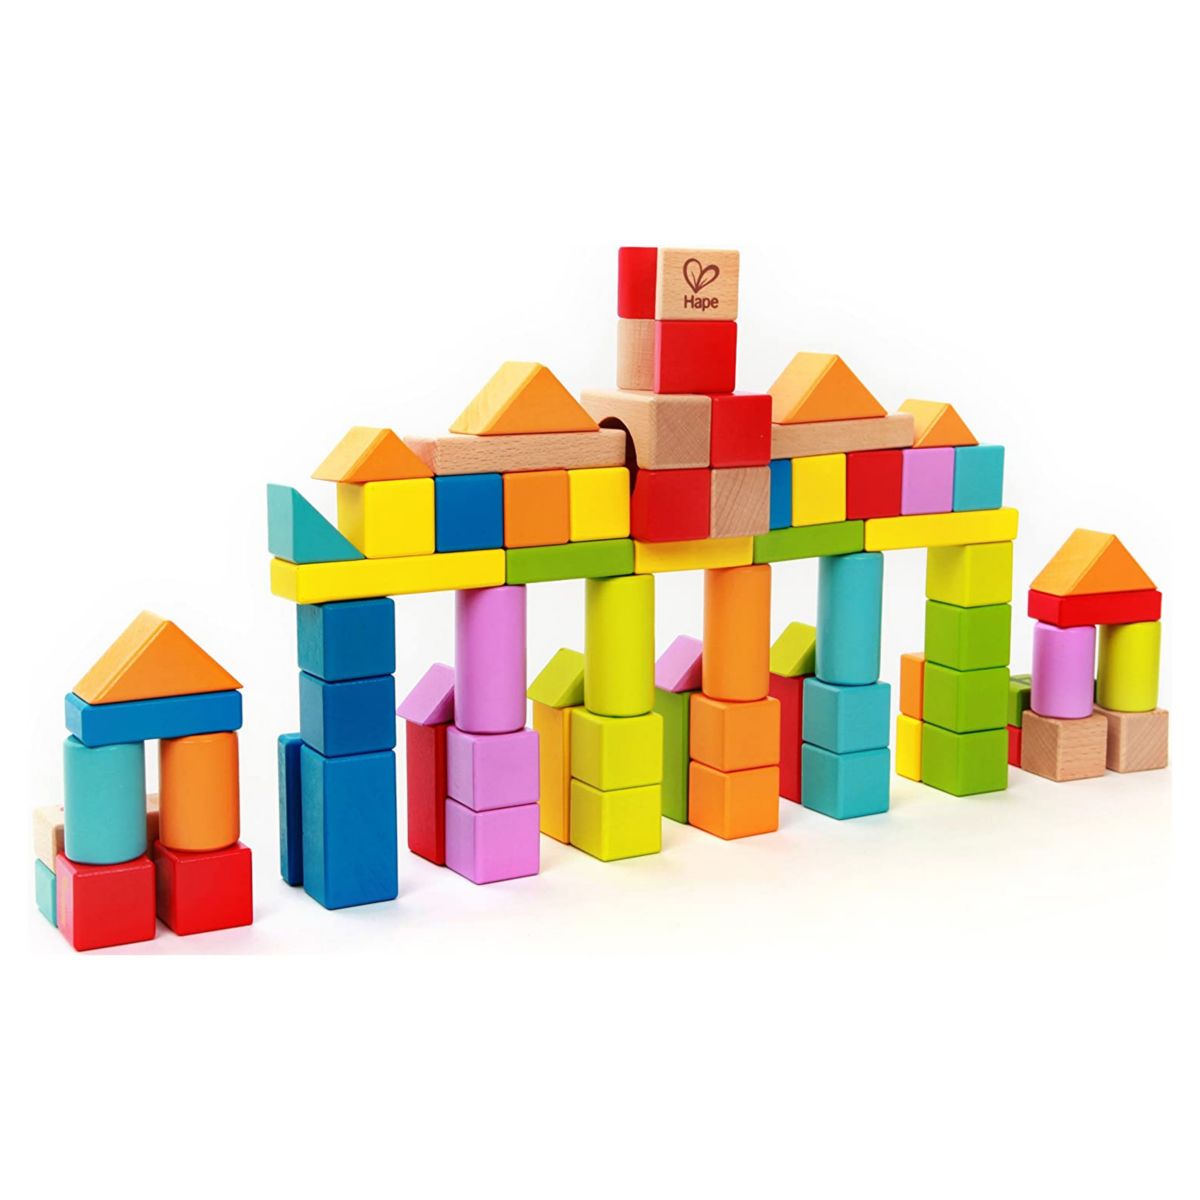 Hape Colored Stacking Blocks Solid Wooden Playset for Ages 3 and Up, 80 Pieces Hape